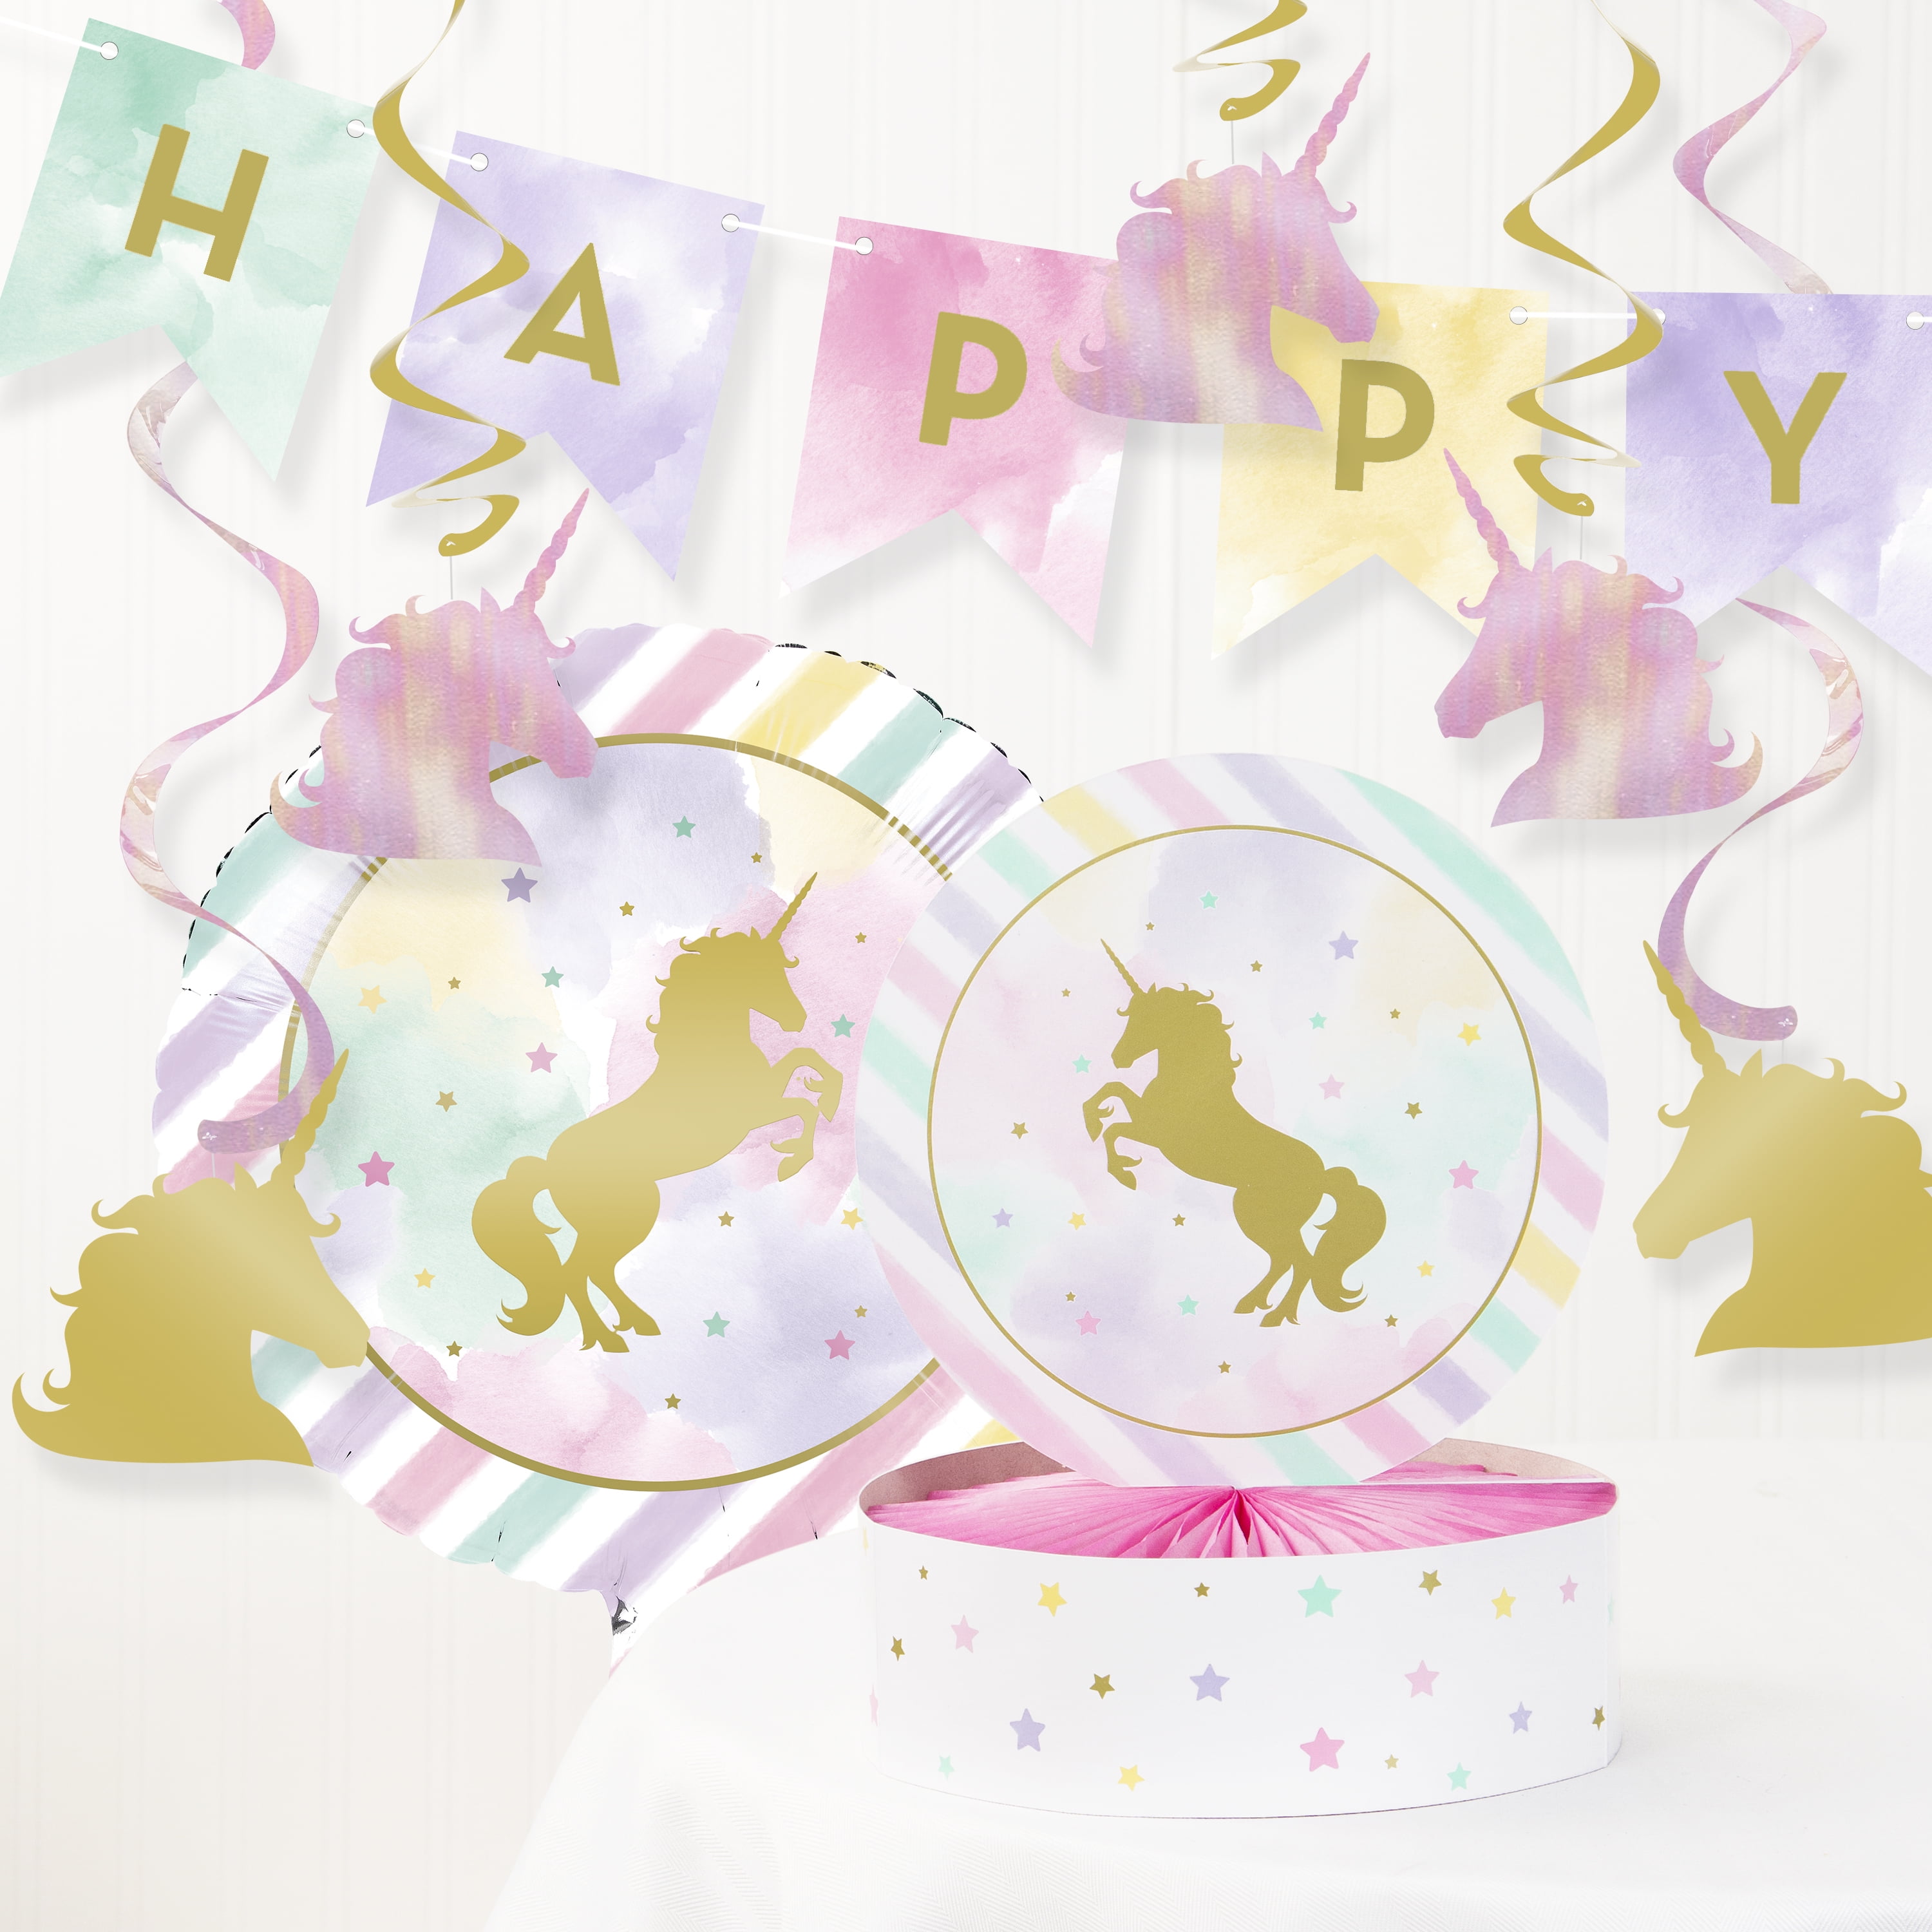 Unicorn Party Supplies Unicorn Decorations 9 Inch Tall Filled with Unicorn Party Favors for Unicorn Birthday Party Supplies & More